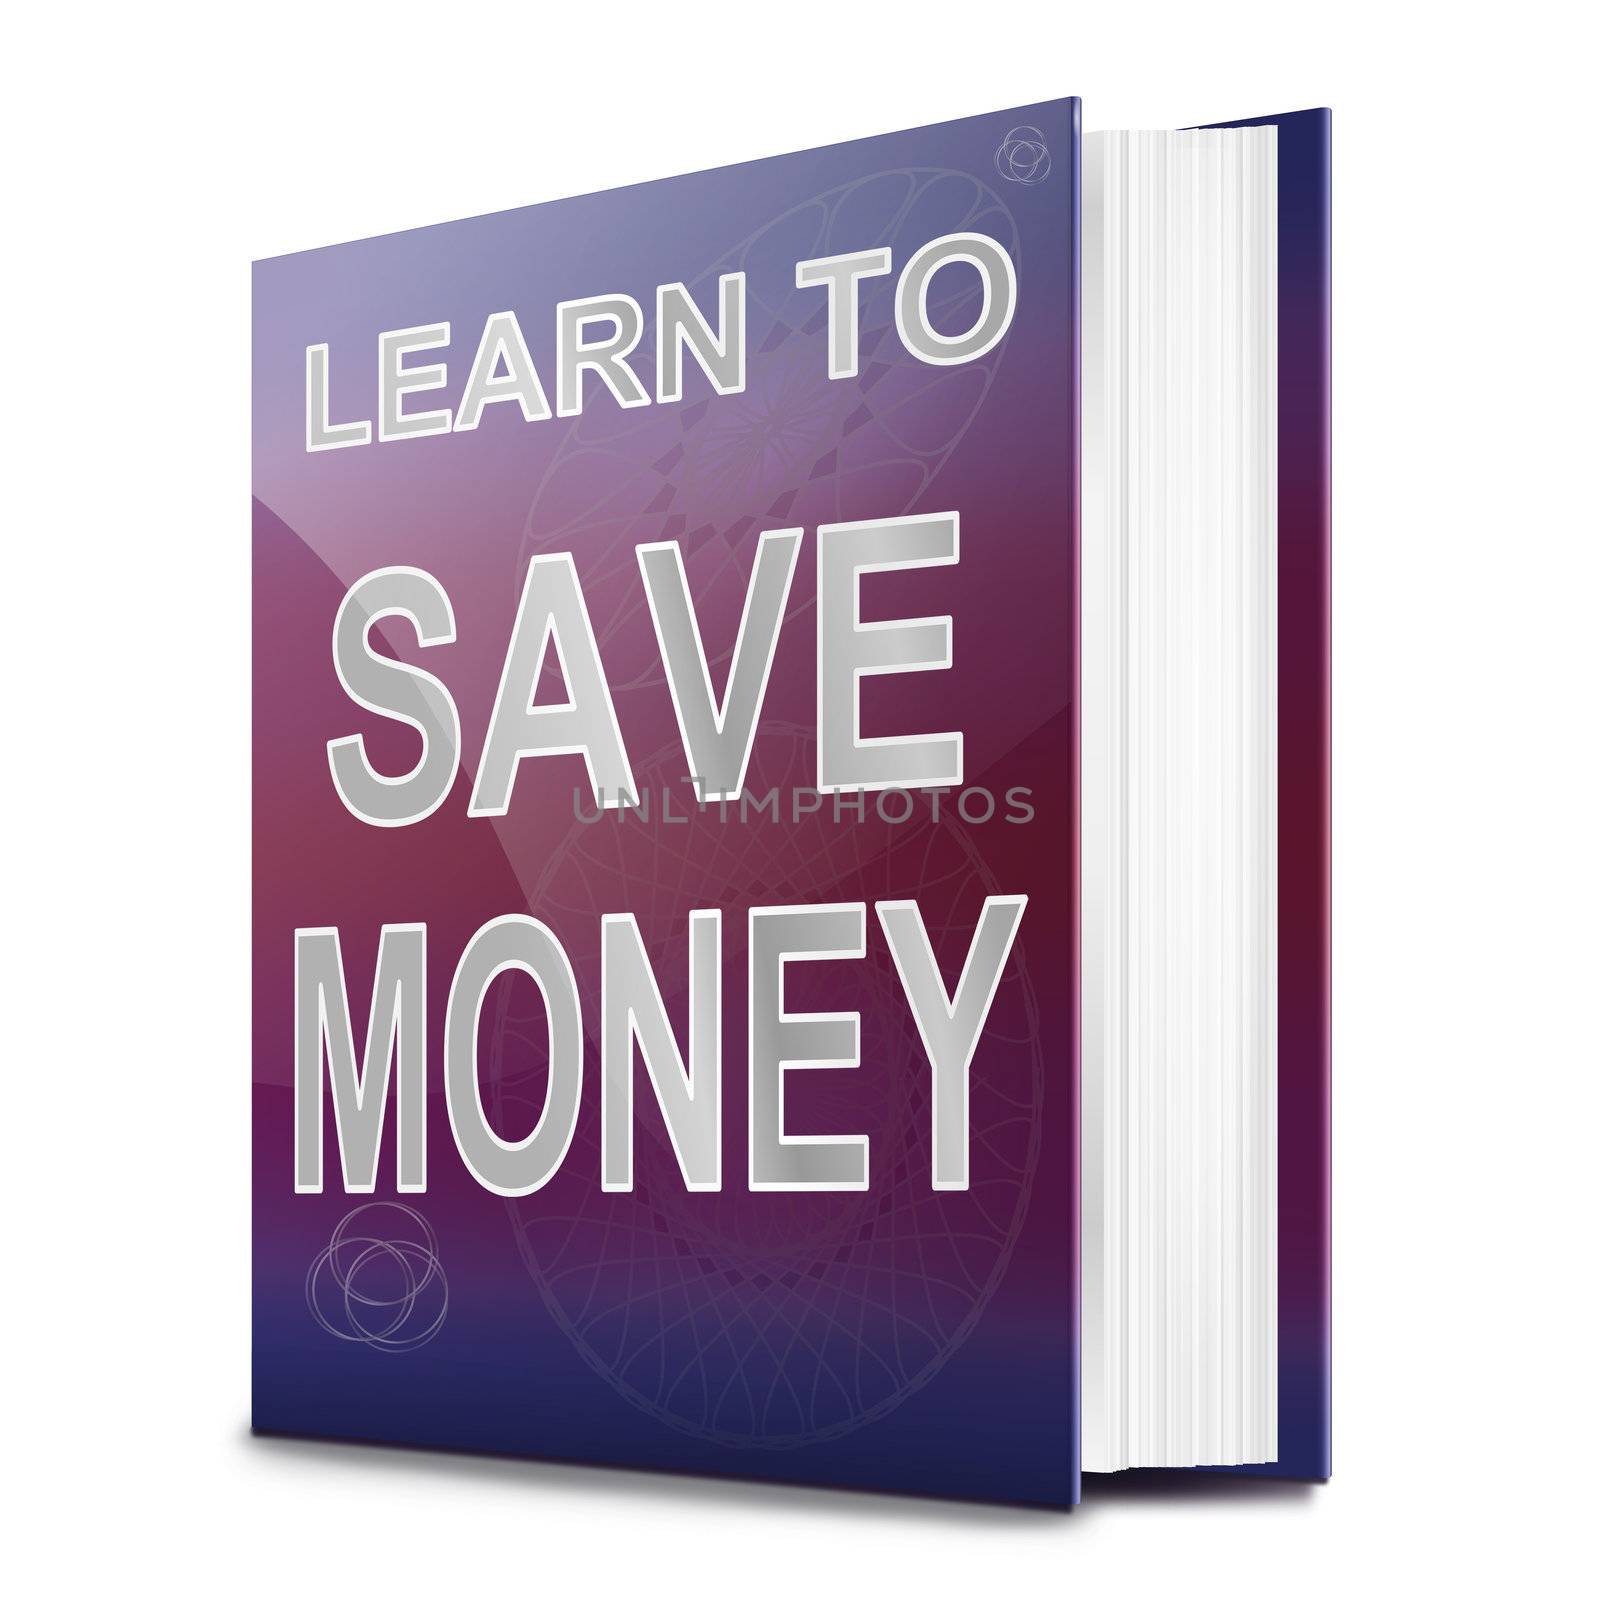 Illustration depicting a book with a saving money concept title. White background.